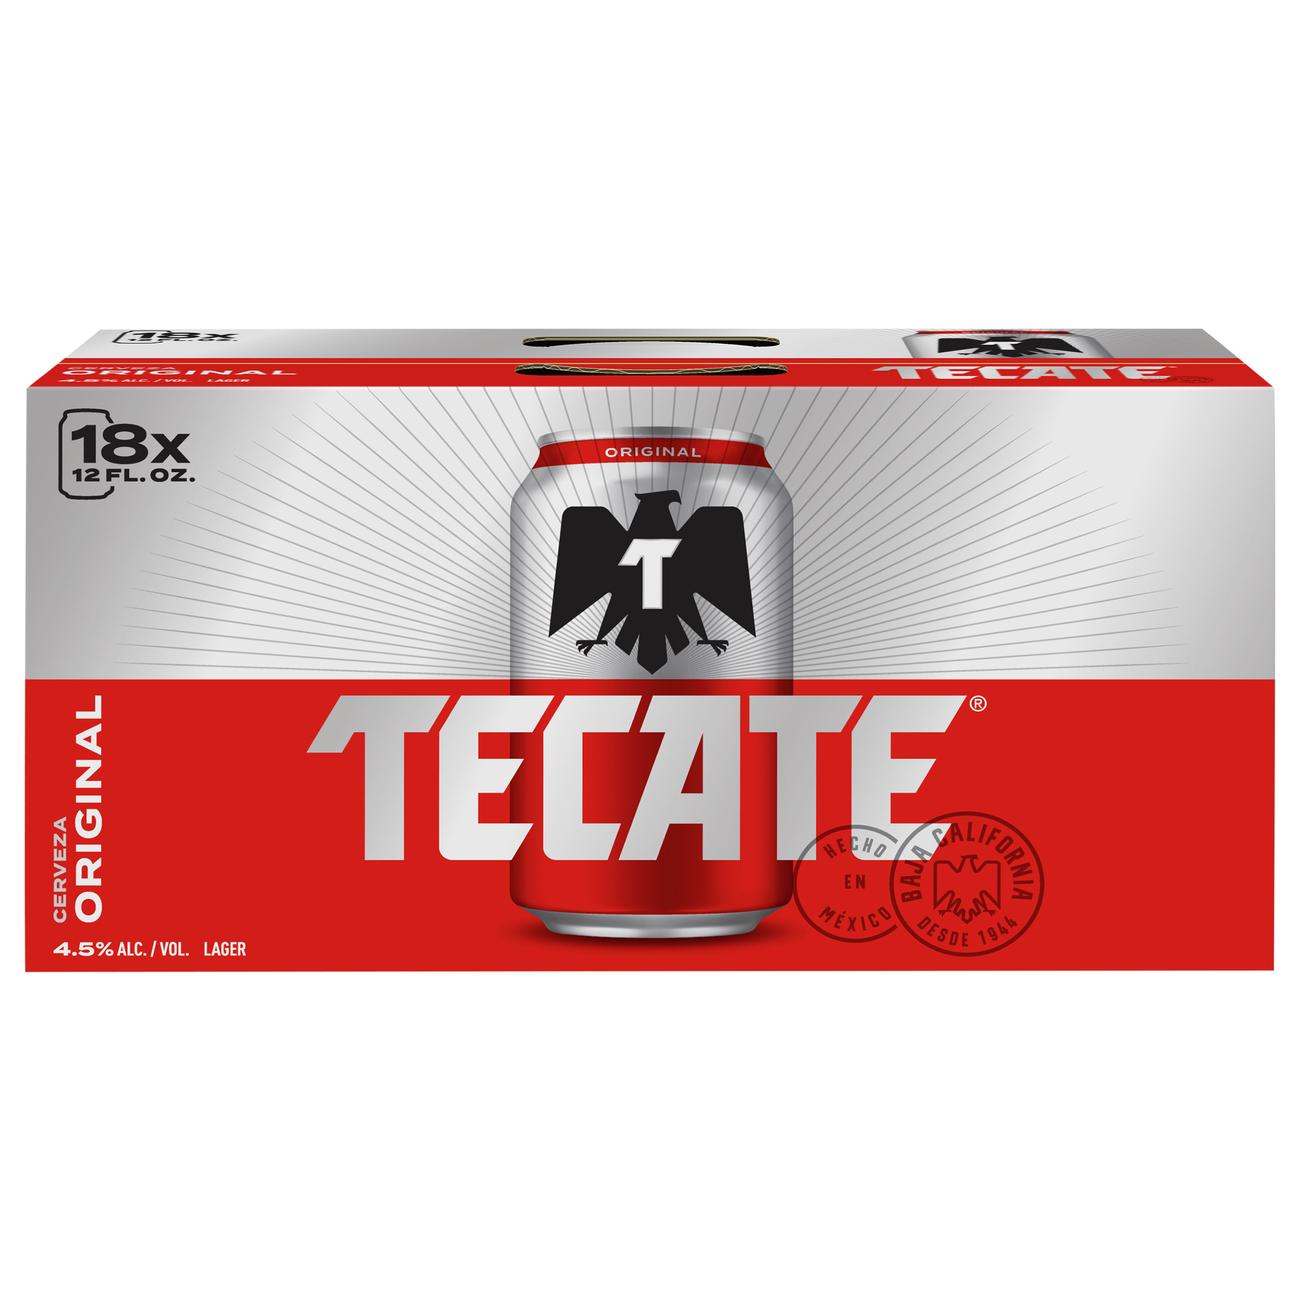 Tecate Beer 12 oz Cans; image 3 of 3